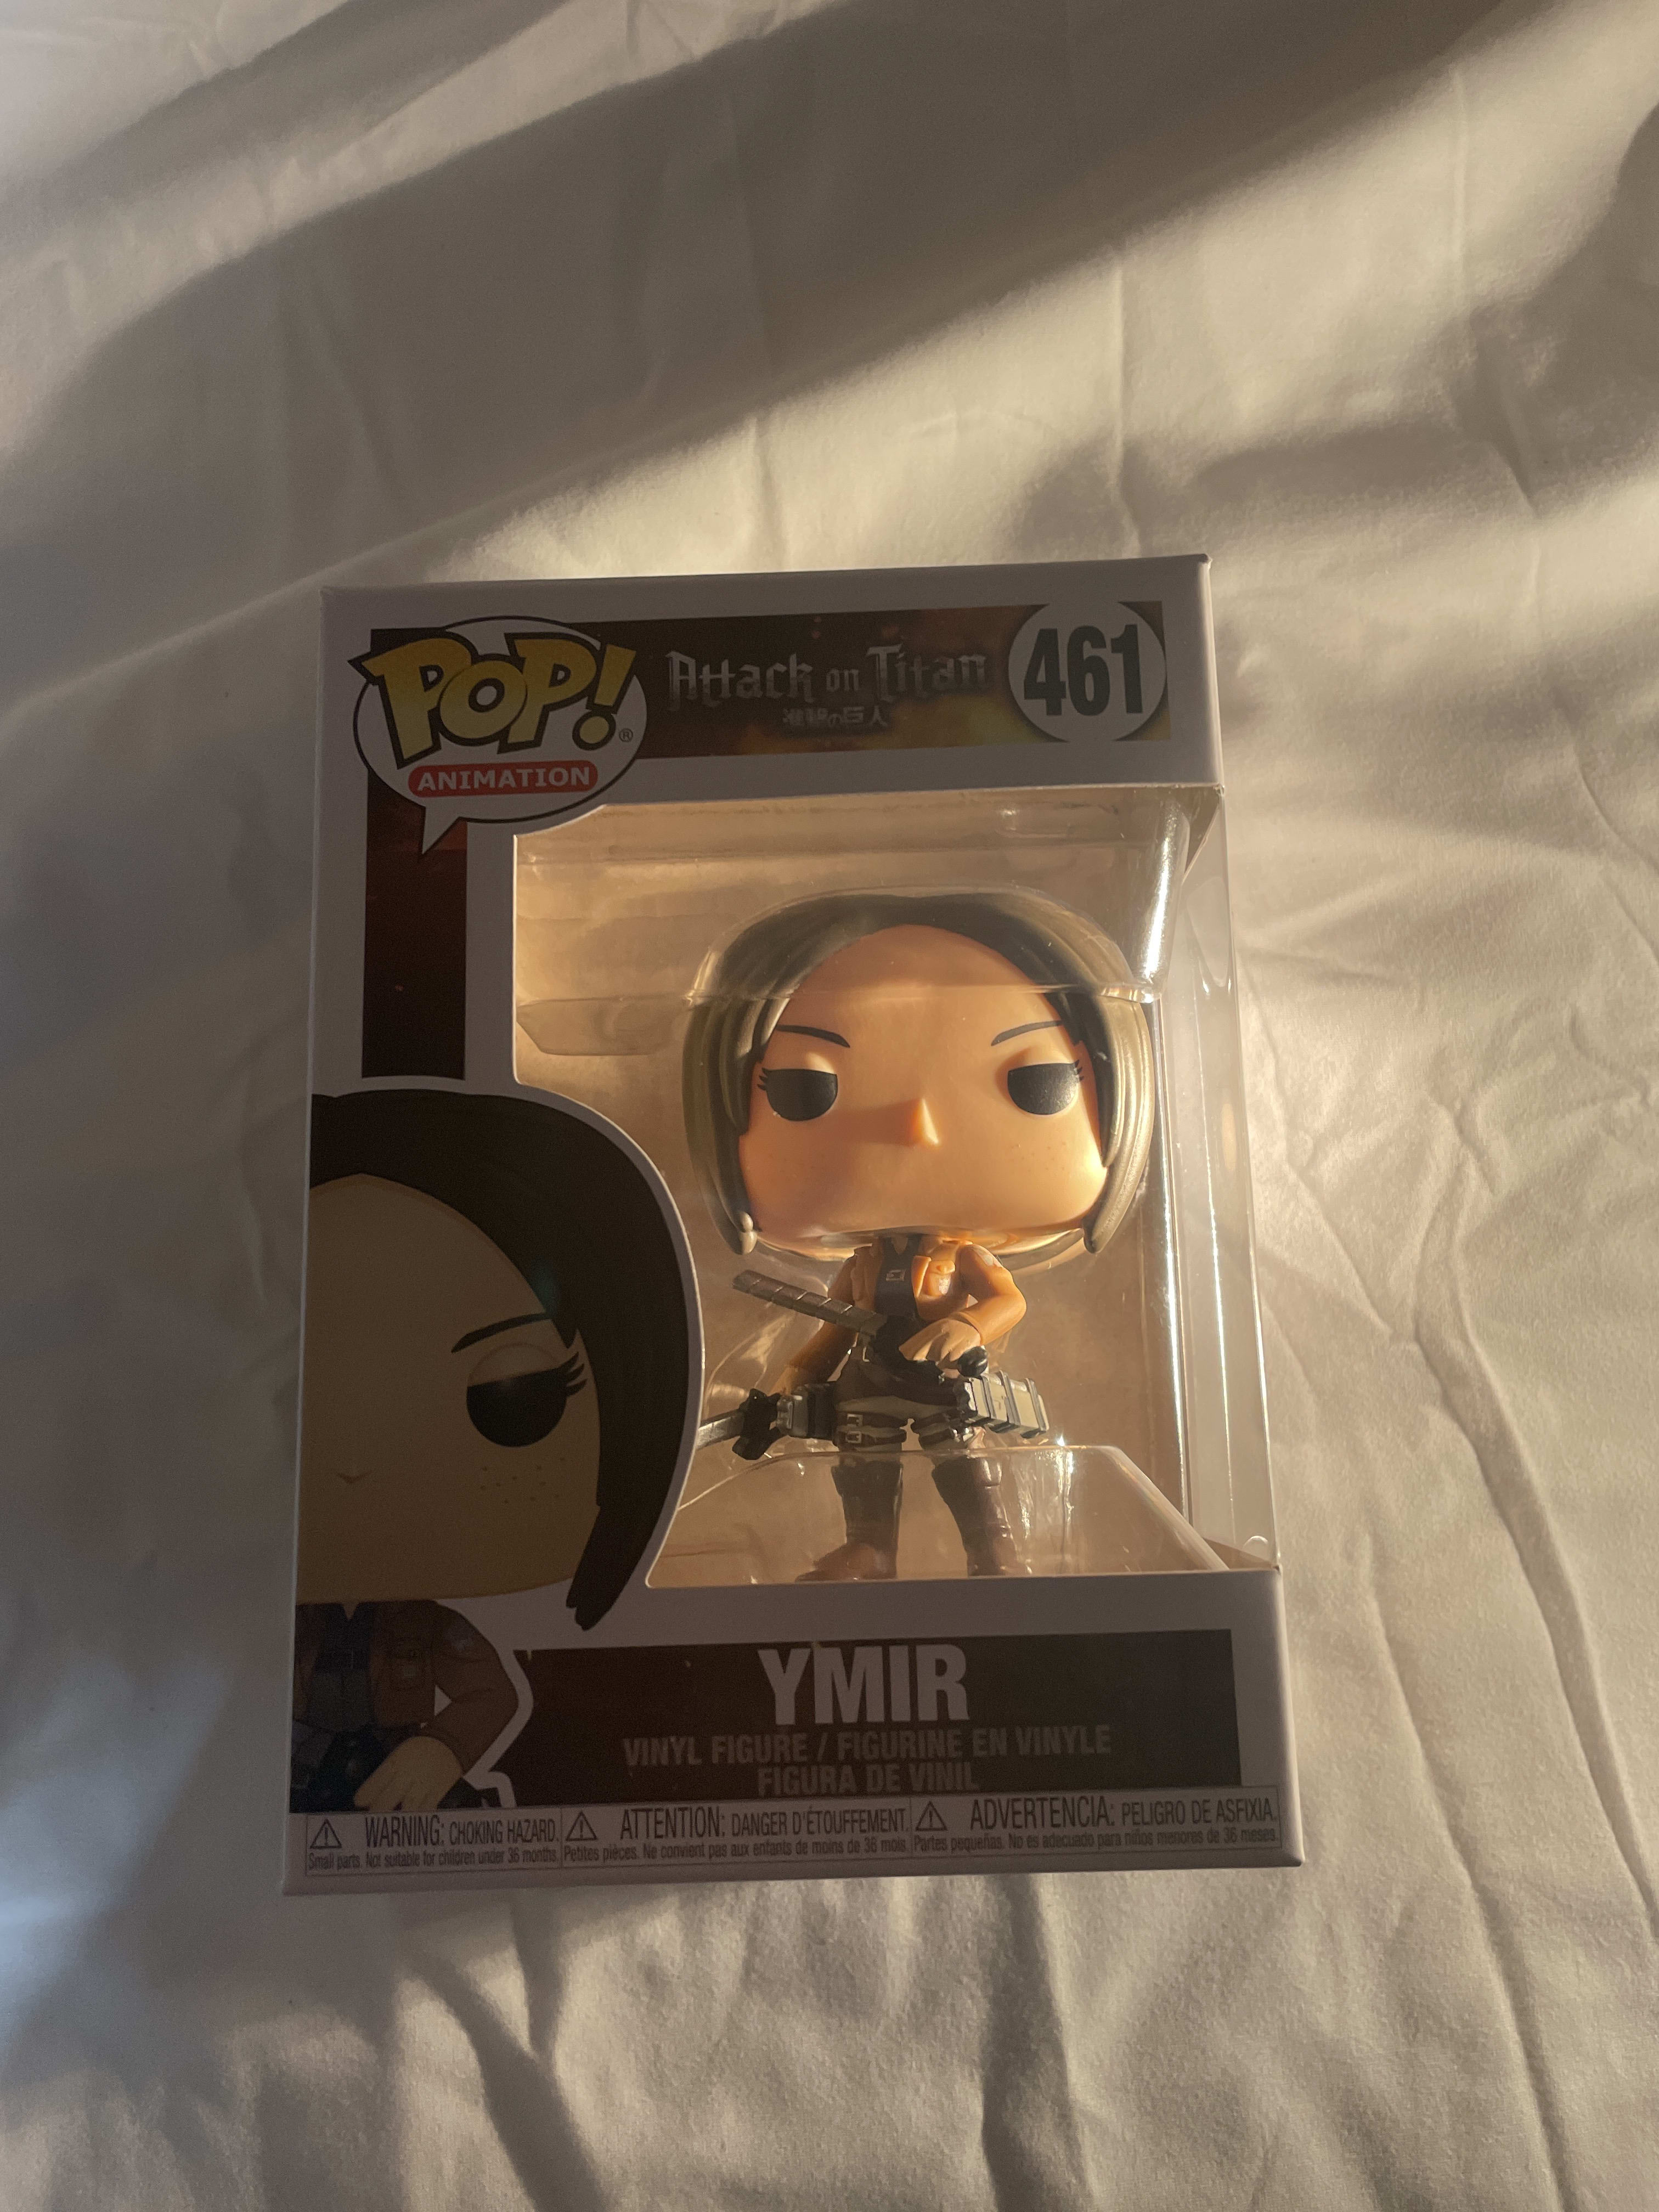 Pop Animation Attack on Titan #461 YMIR - FUNKO POPS - Jims Odd and Ends  Inc